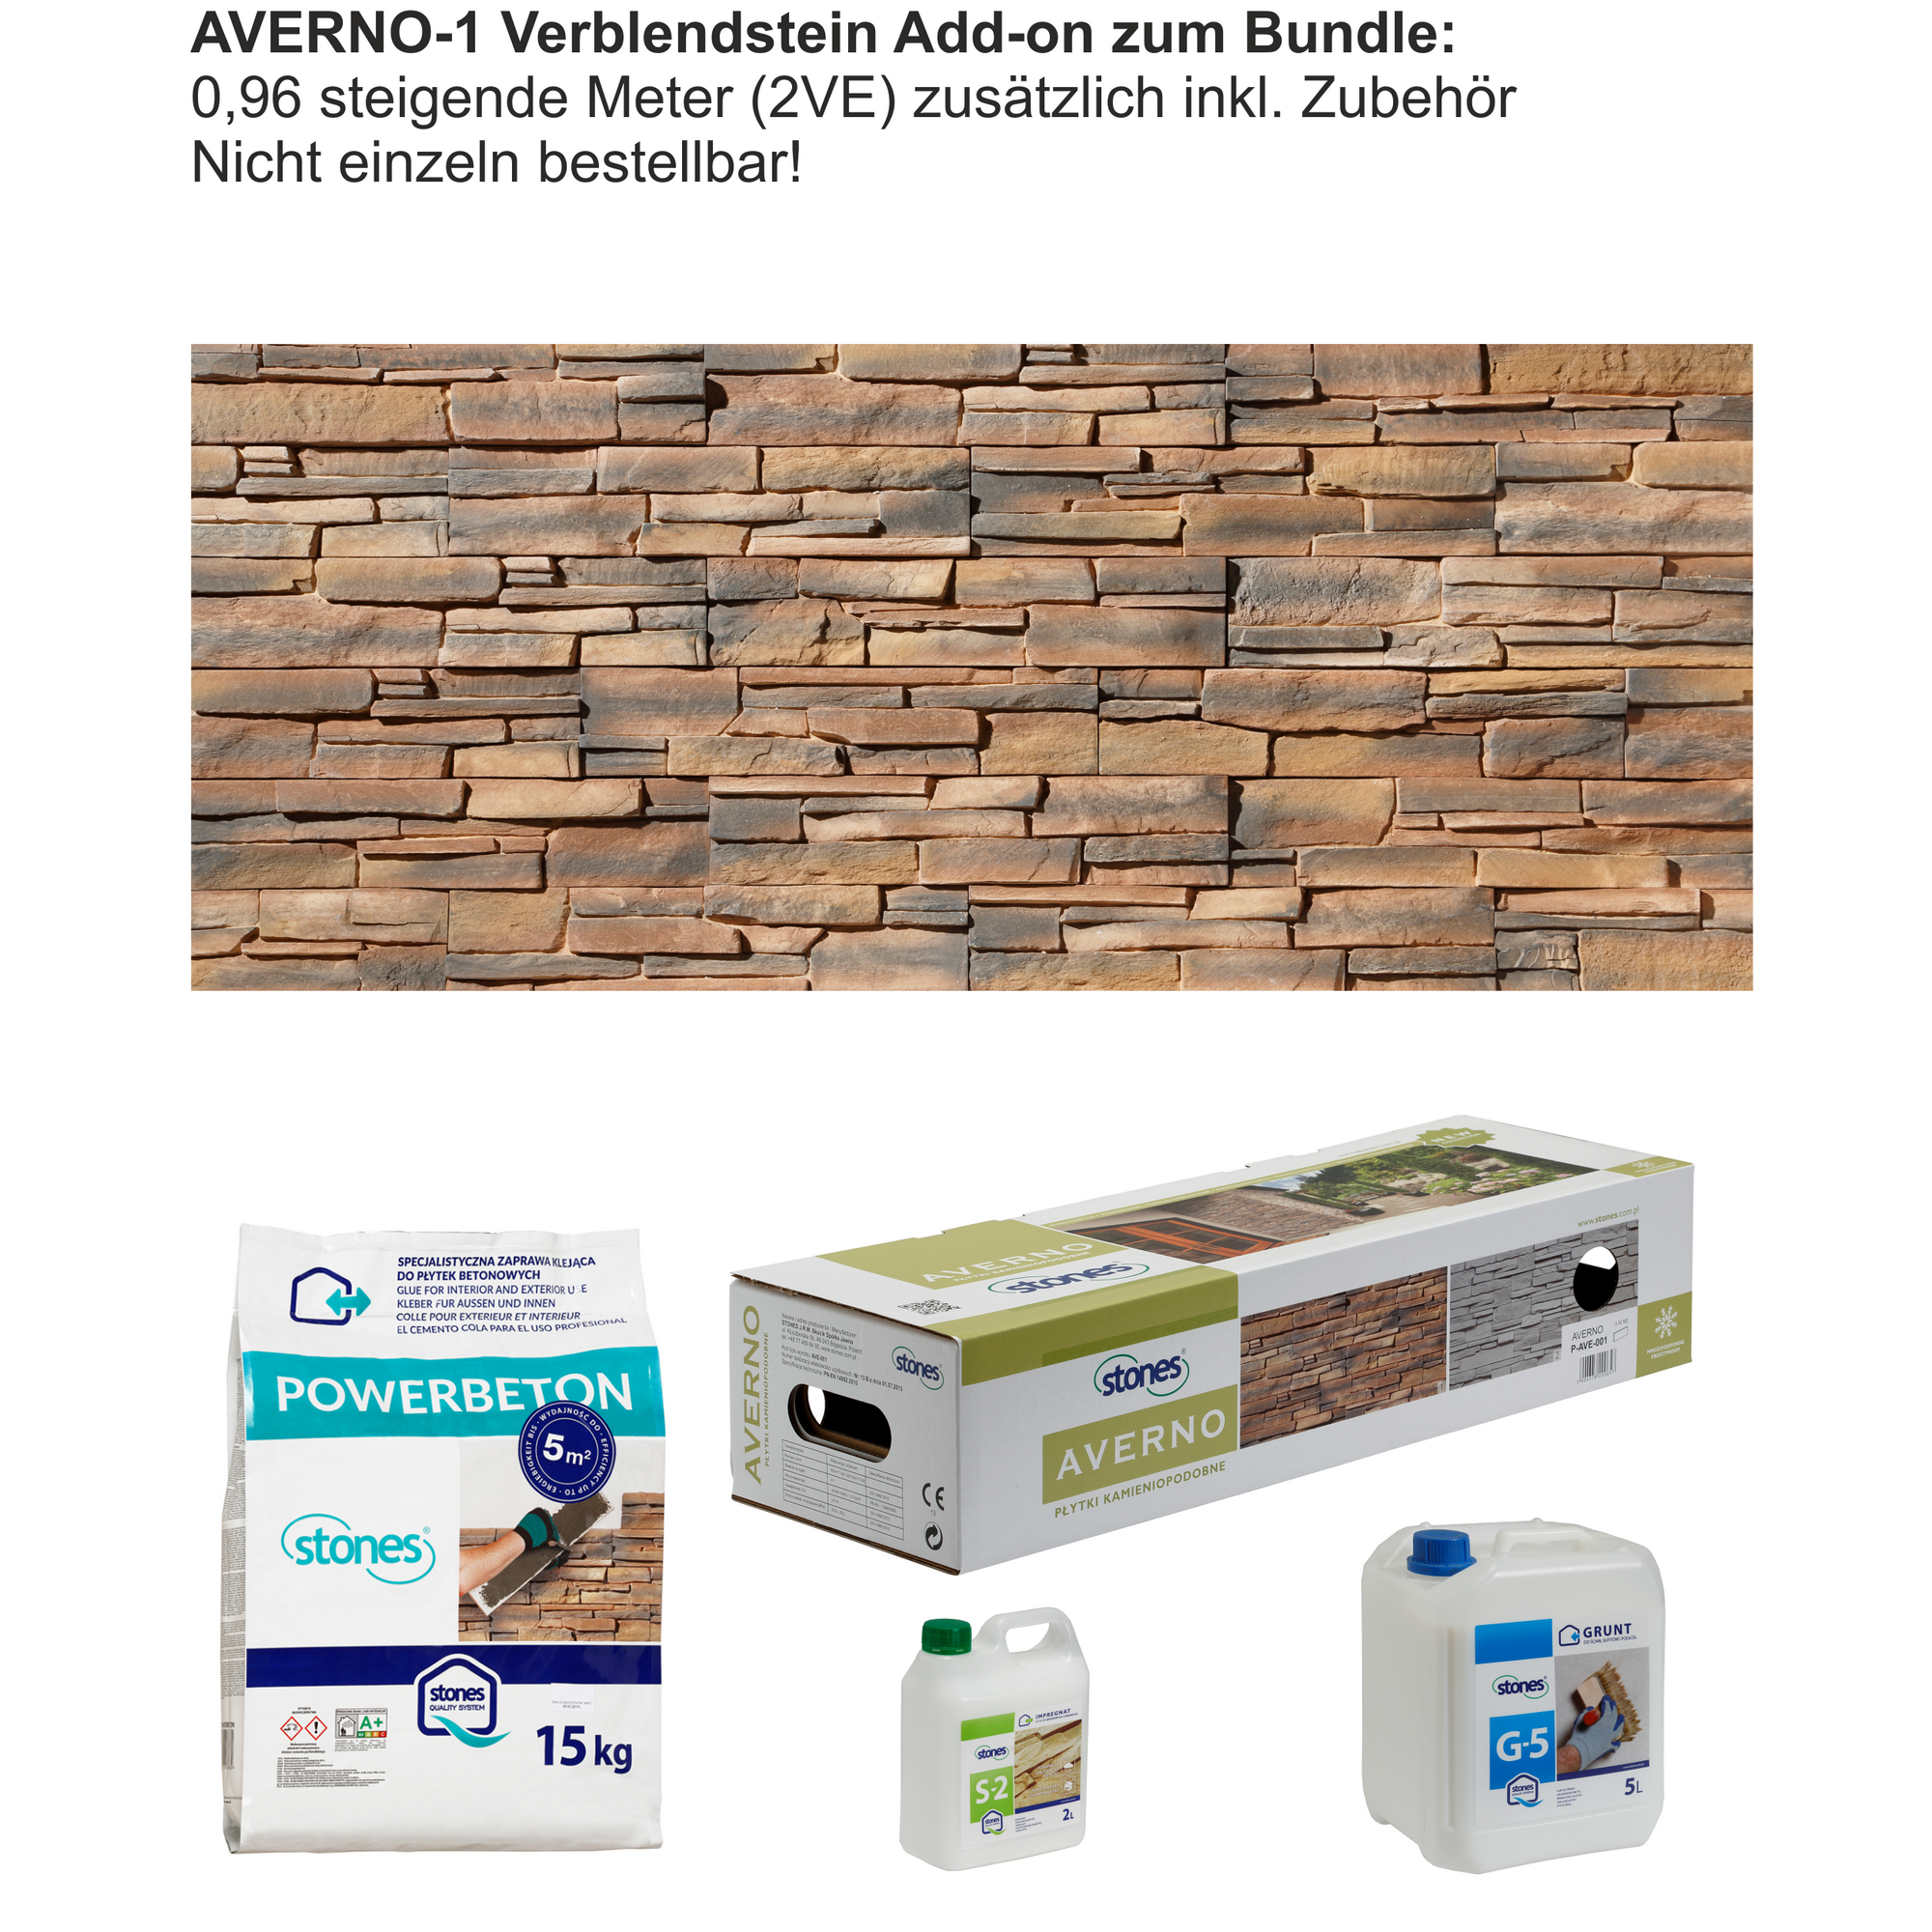 Add-on Verblender 'Averno-1' 0,96 m² zum Bundle + product picture